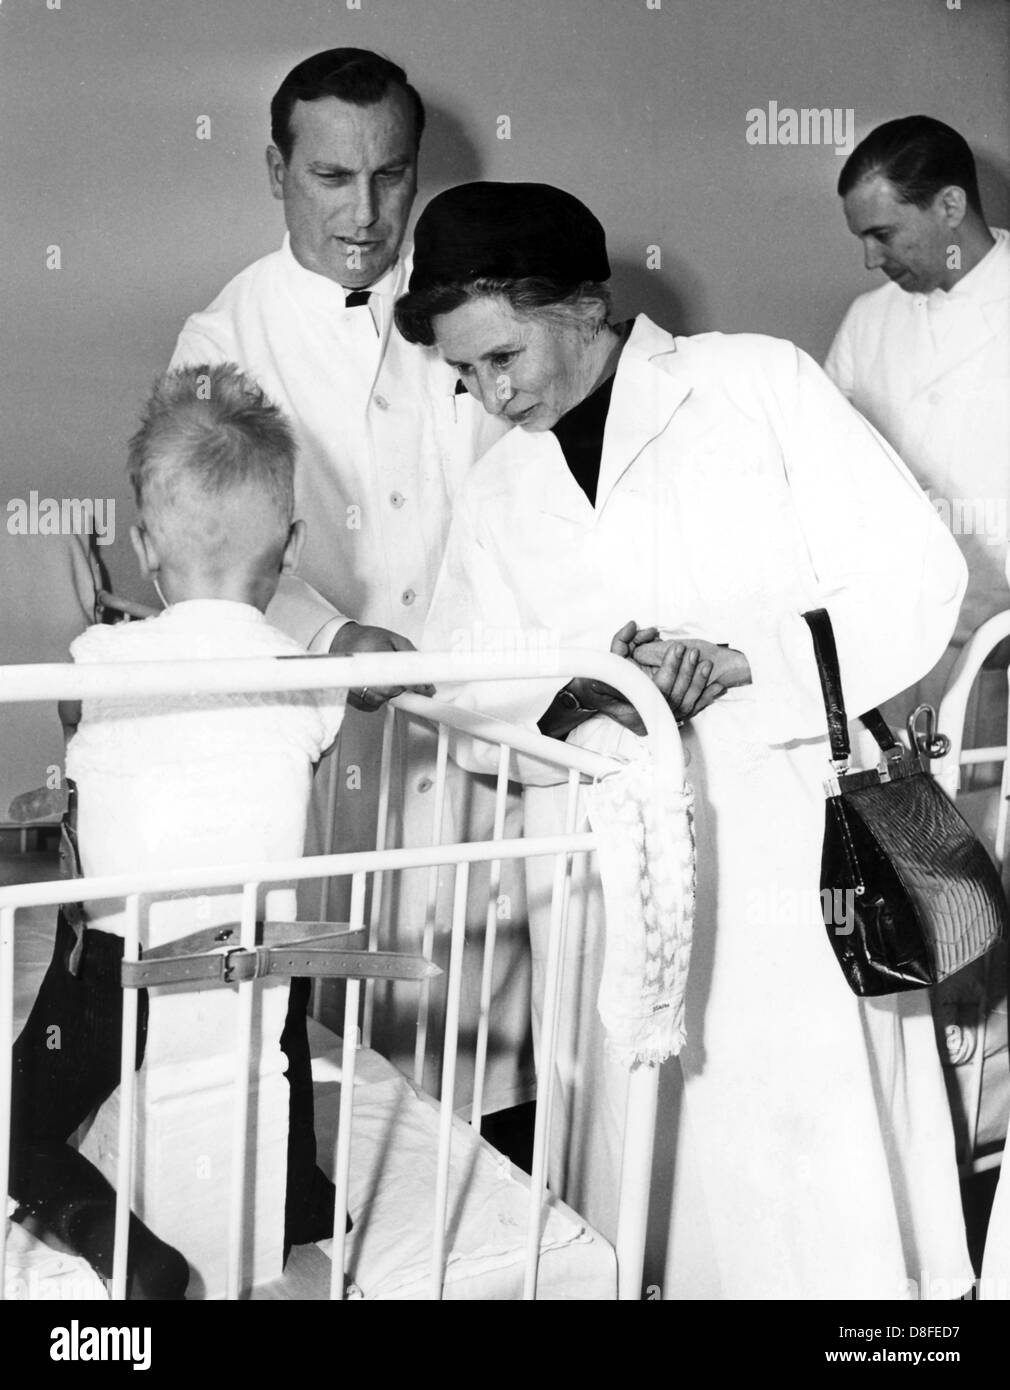 German health minister Elisabeth Schwarzhaupt visits Contergan affected children at the dysmelia ward of the the 'Anna-Stift' hospital in Hanover, Germany, 2 April 1963. To her left stands Professor Dr. Gustav Hauberg, head physician of the hospital. Stock Photo